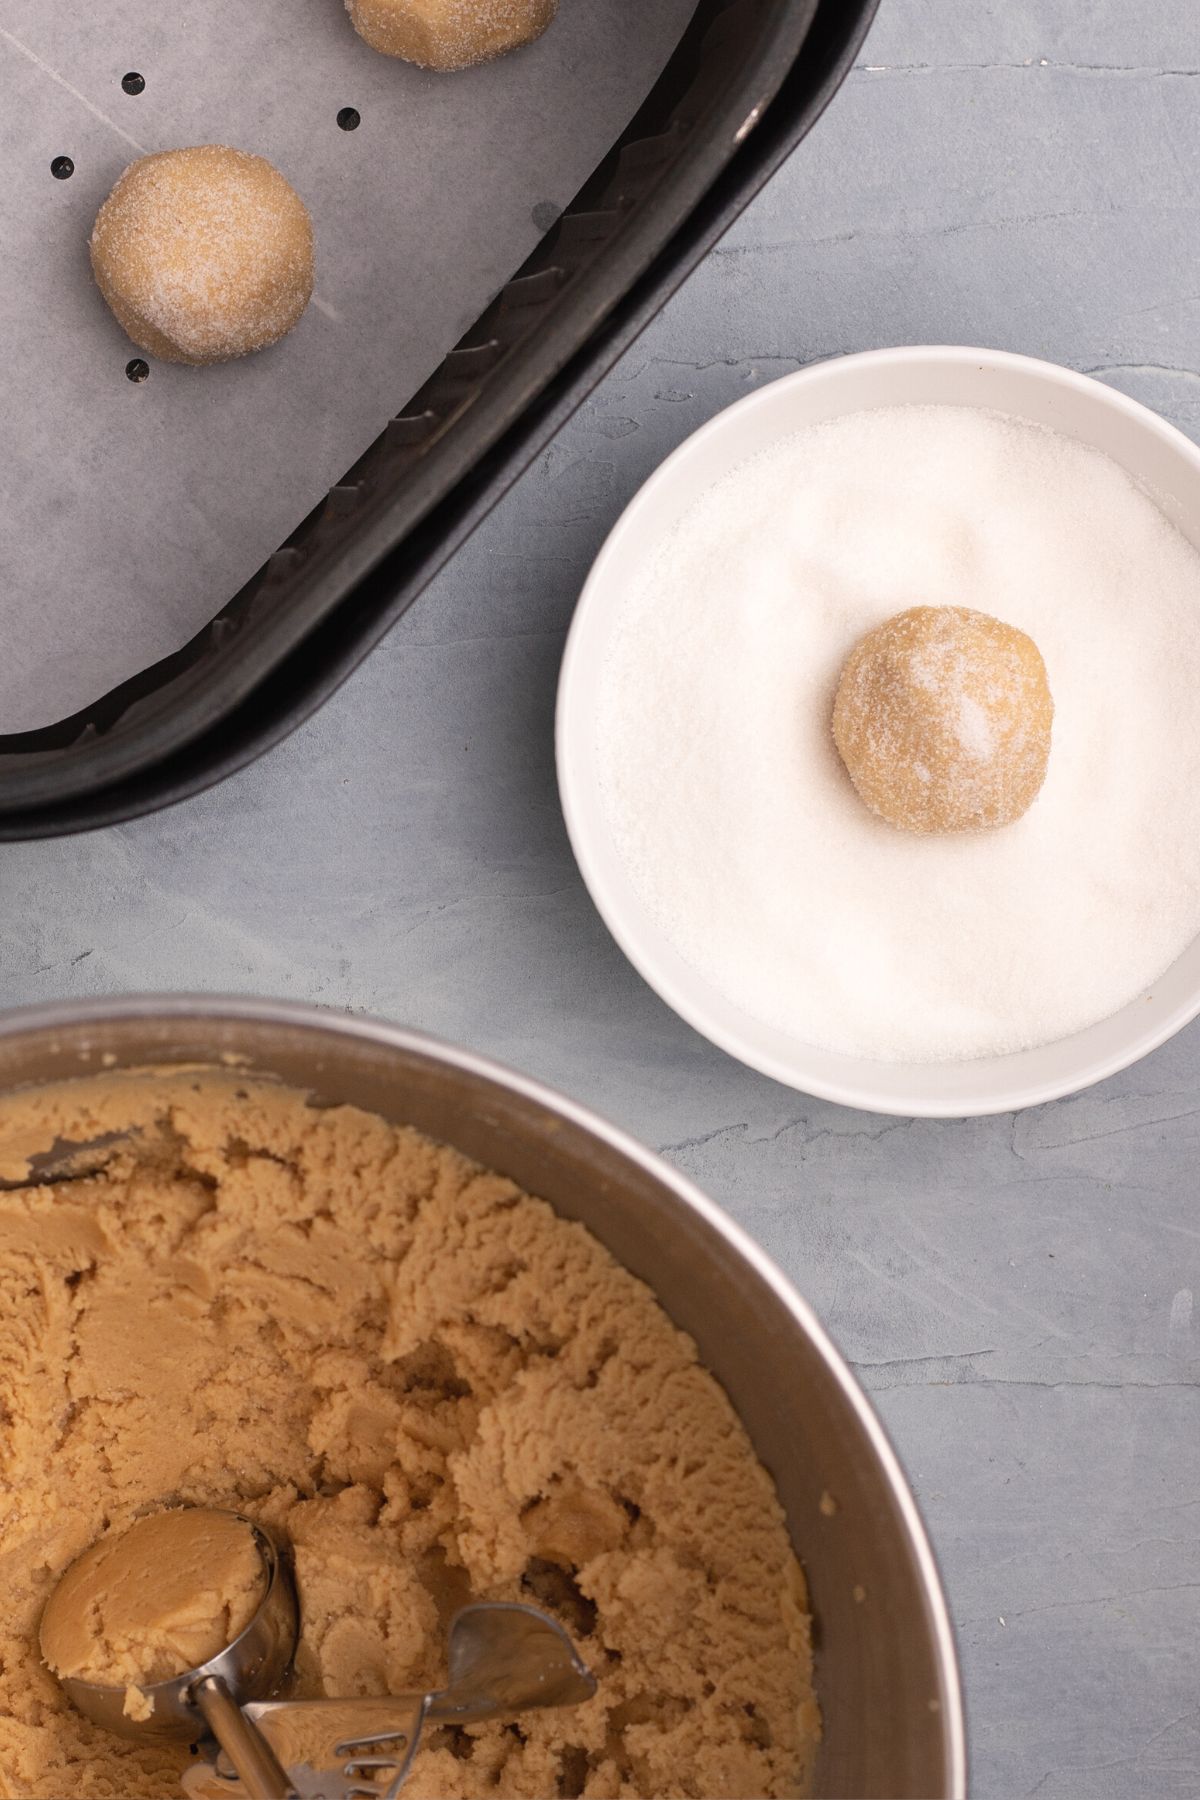 Scoops of dough being coated with sugar and then placed in the air fryer basket lined with parchment paper